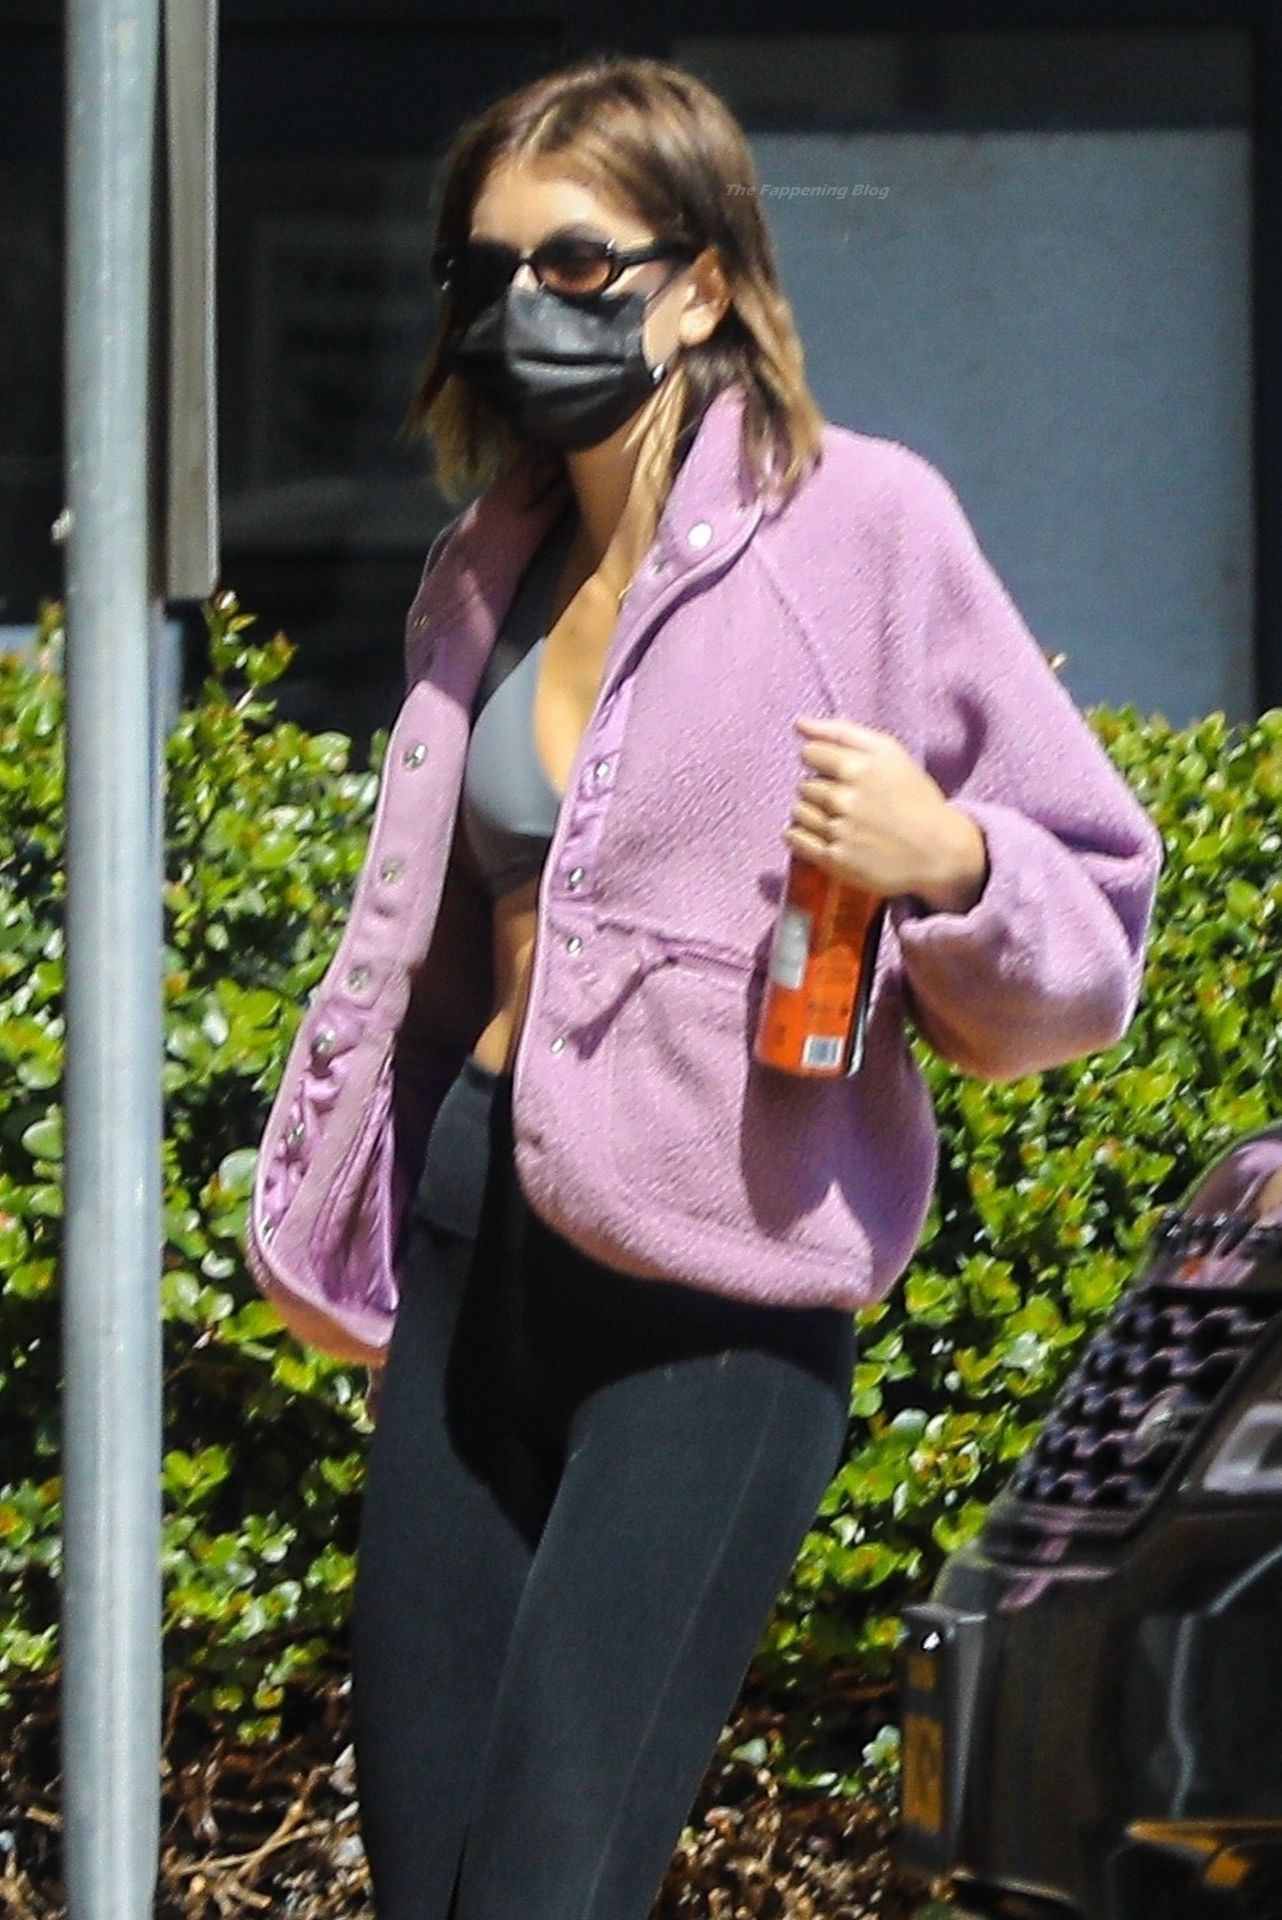 Kaia Gerber Shows Off Her Abs While Grabbing A Coffee At Blue Bottle Coffee 20 相片 裸体名人